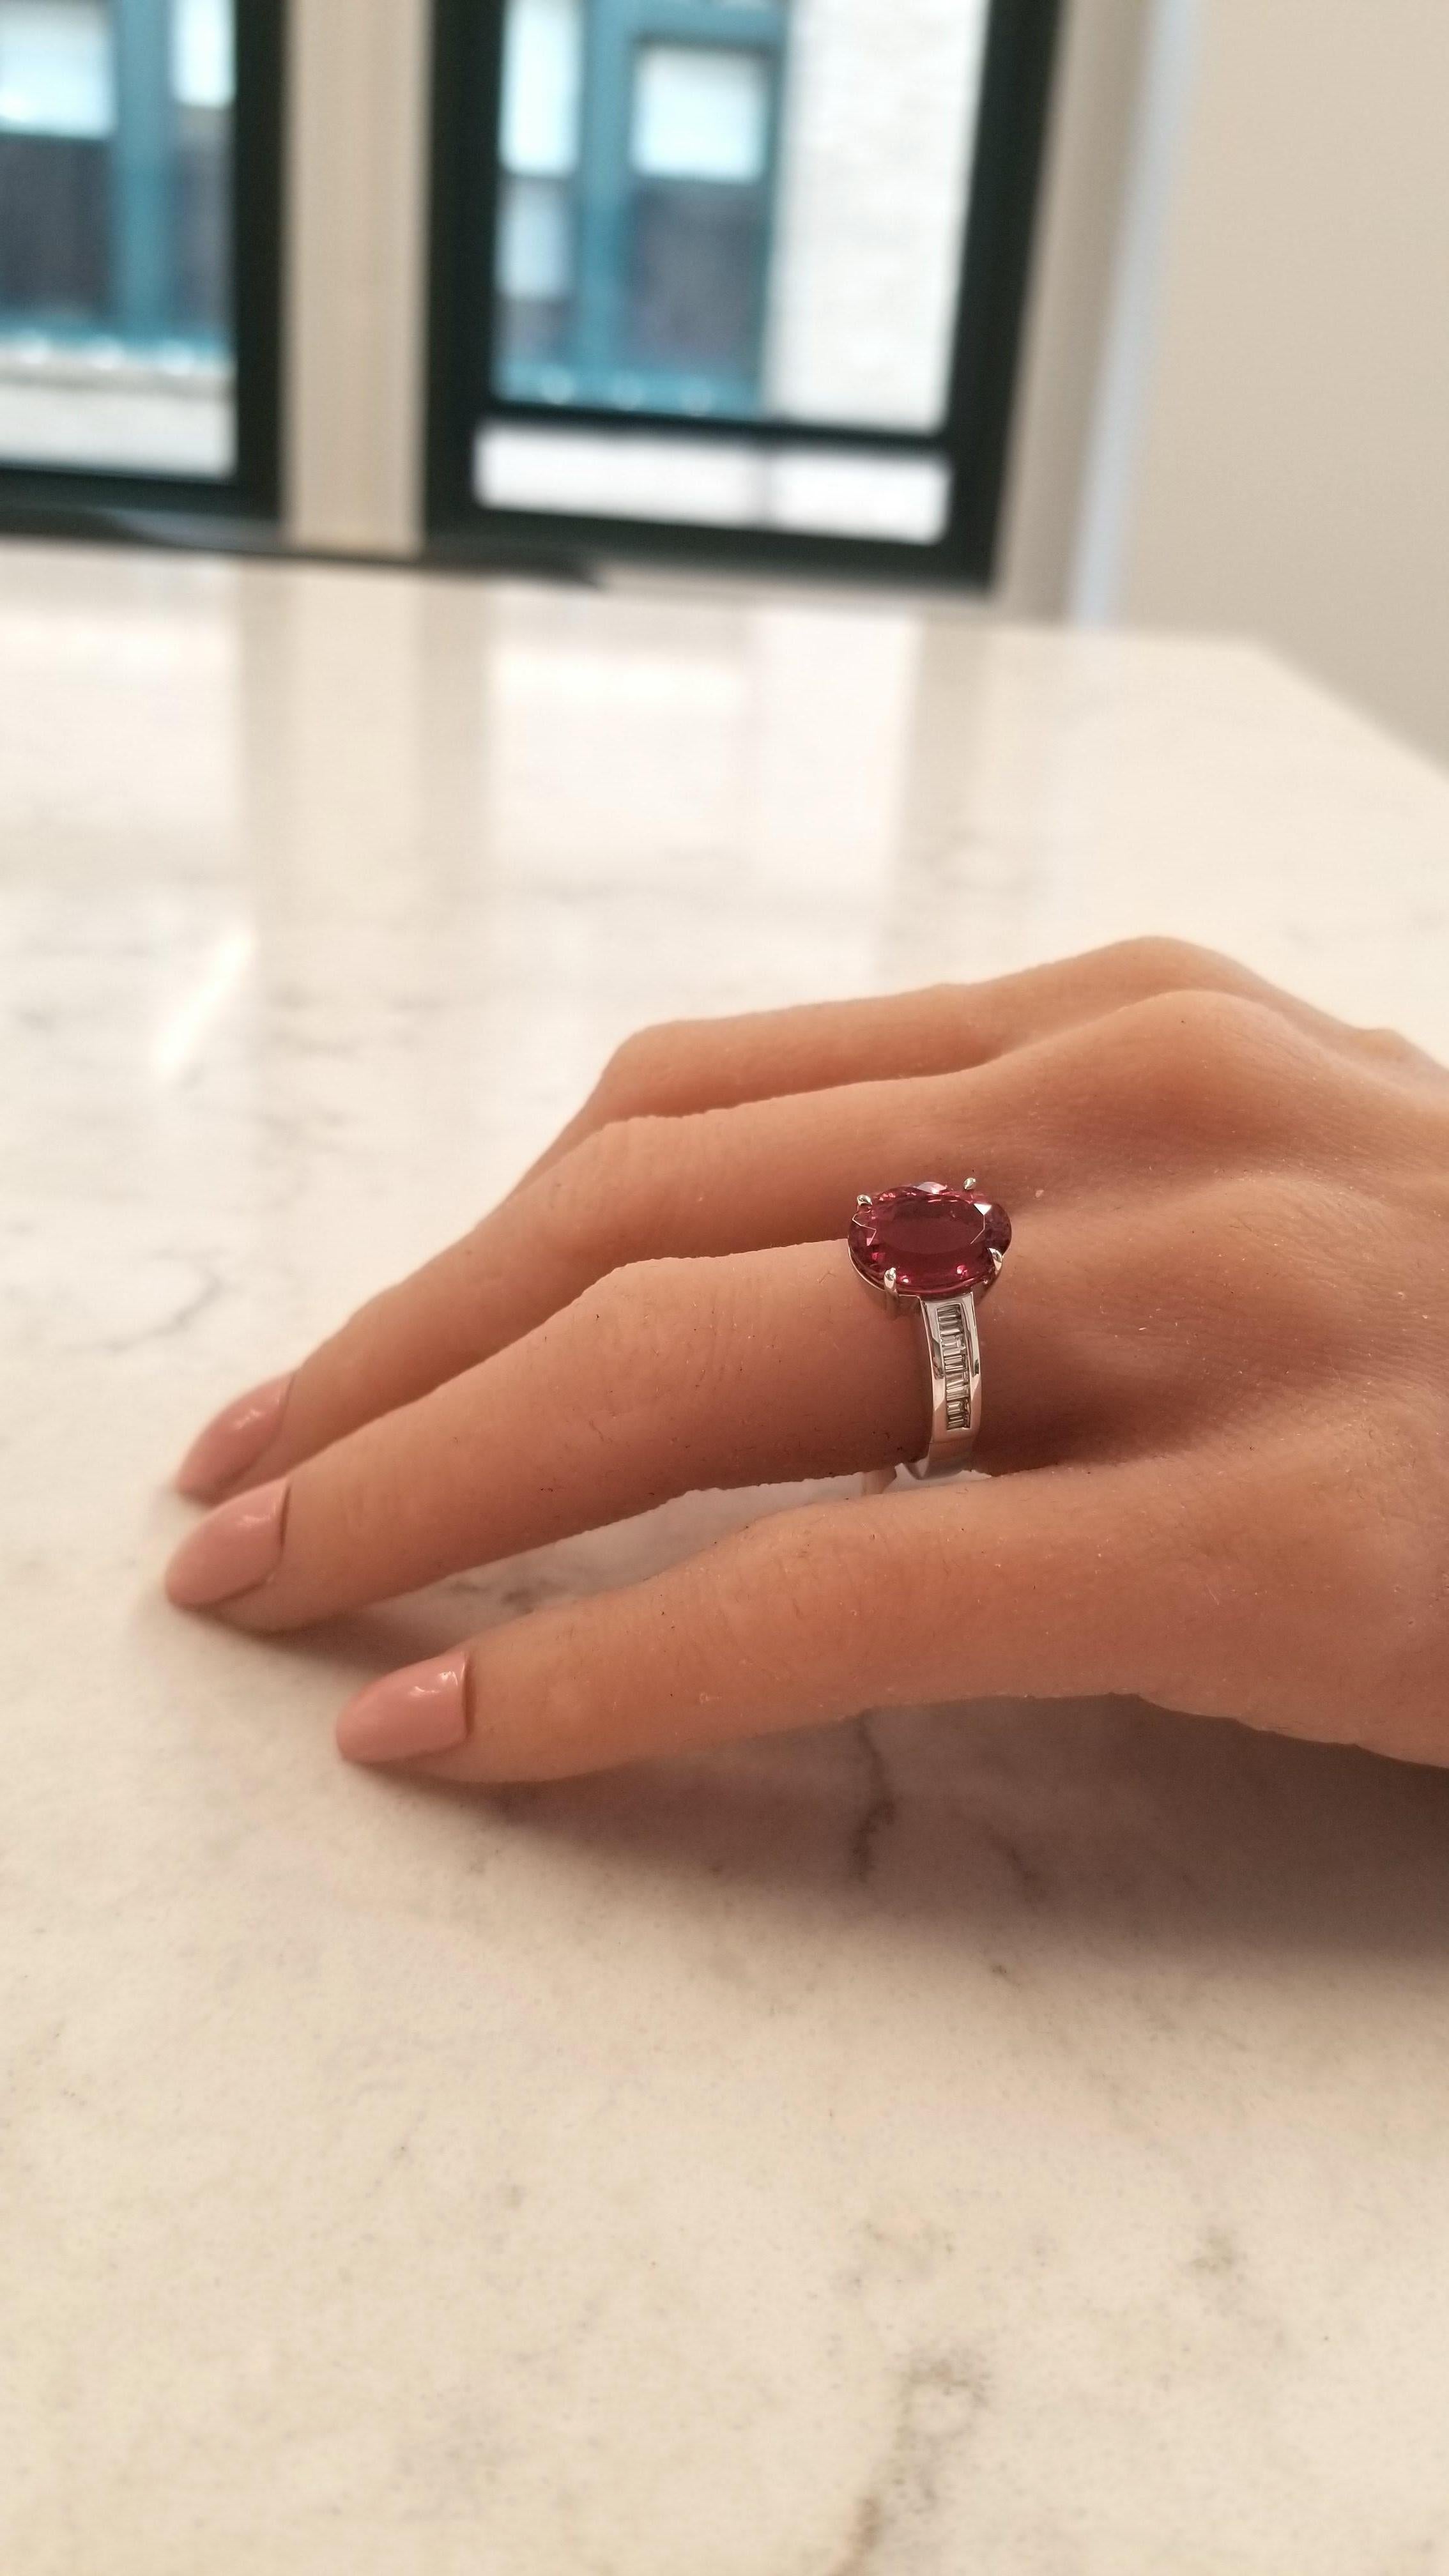 Created in brightly polished 14 karat white gold, this beautiful custom made engagement anniversary ring features one vibrant raspberry rubellite tourmaline prong-set in the center, accented by shimmering baguette cut diamonds that are invisibly